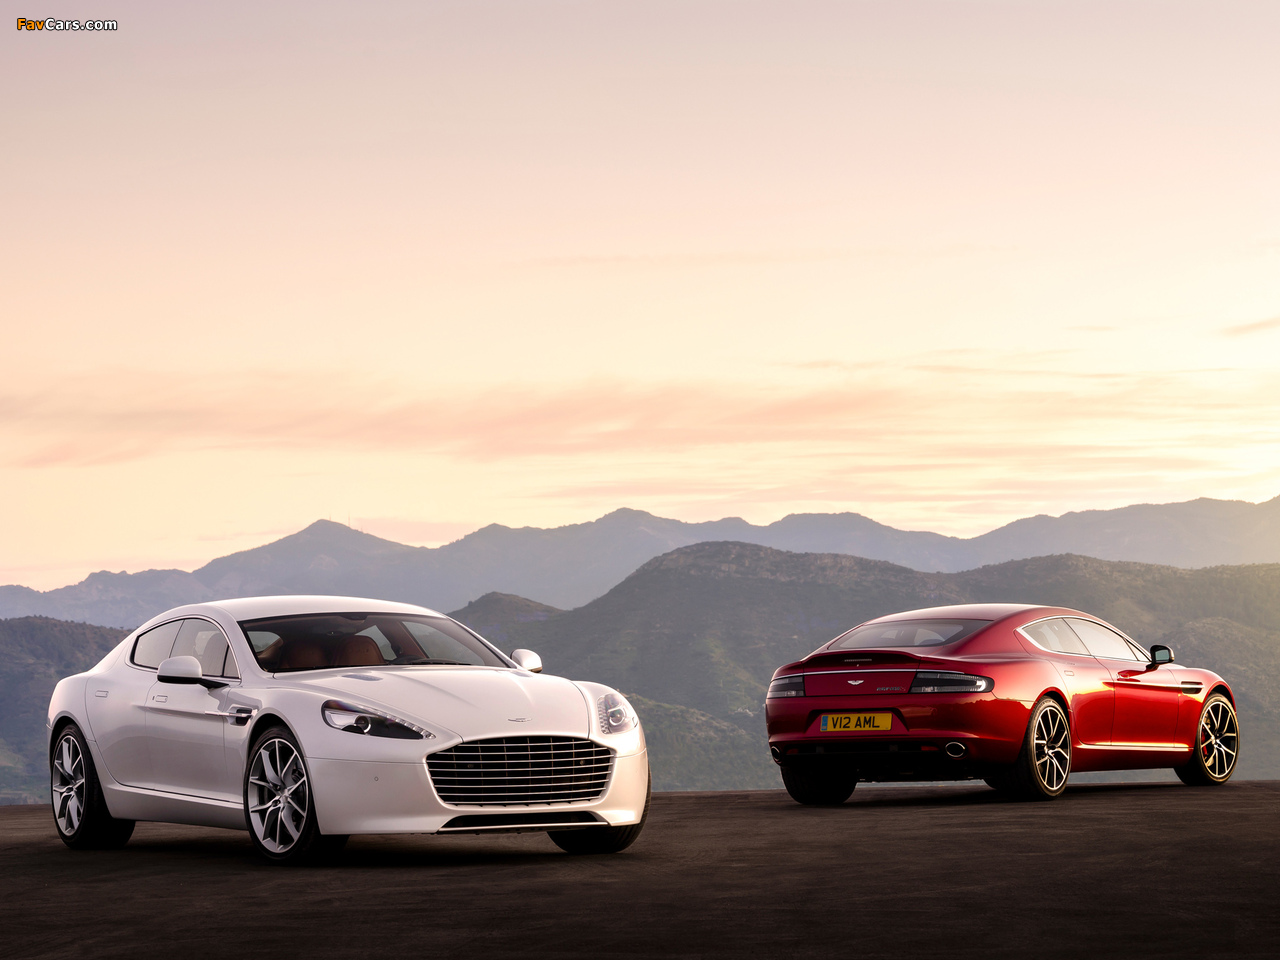 Aston Martin Rapide S 2013 wallpapers (1280 x 960)